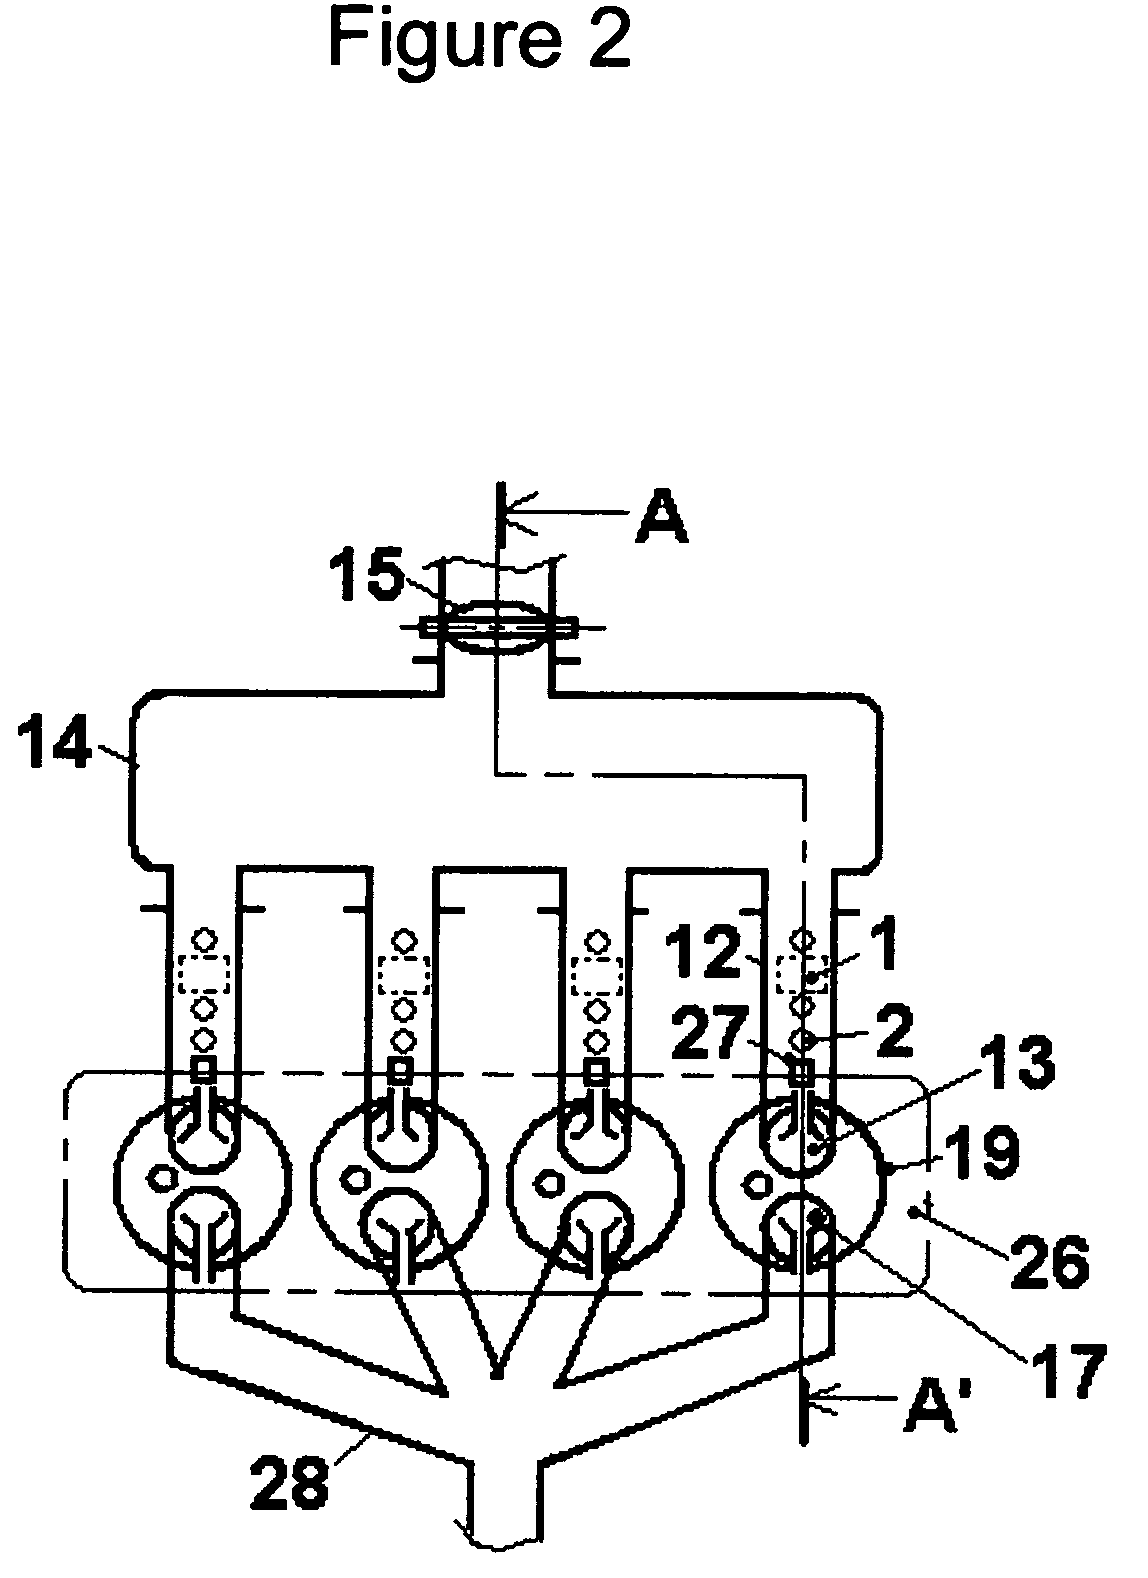 Engine suction air flow rate measuring device